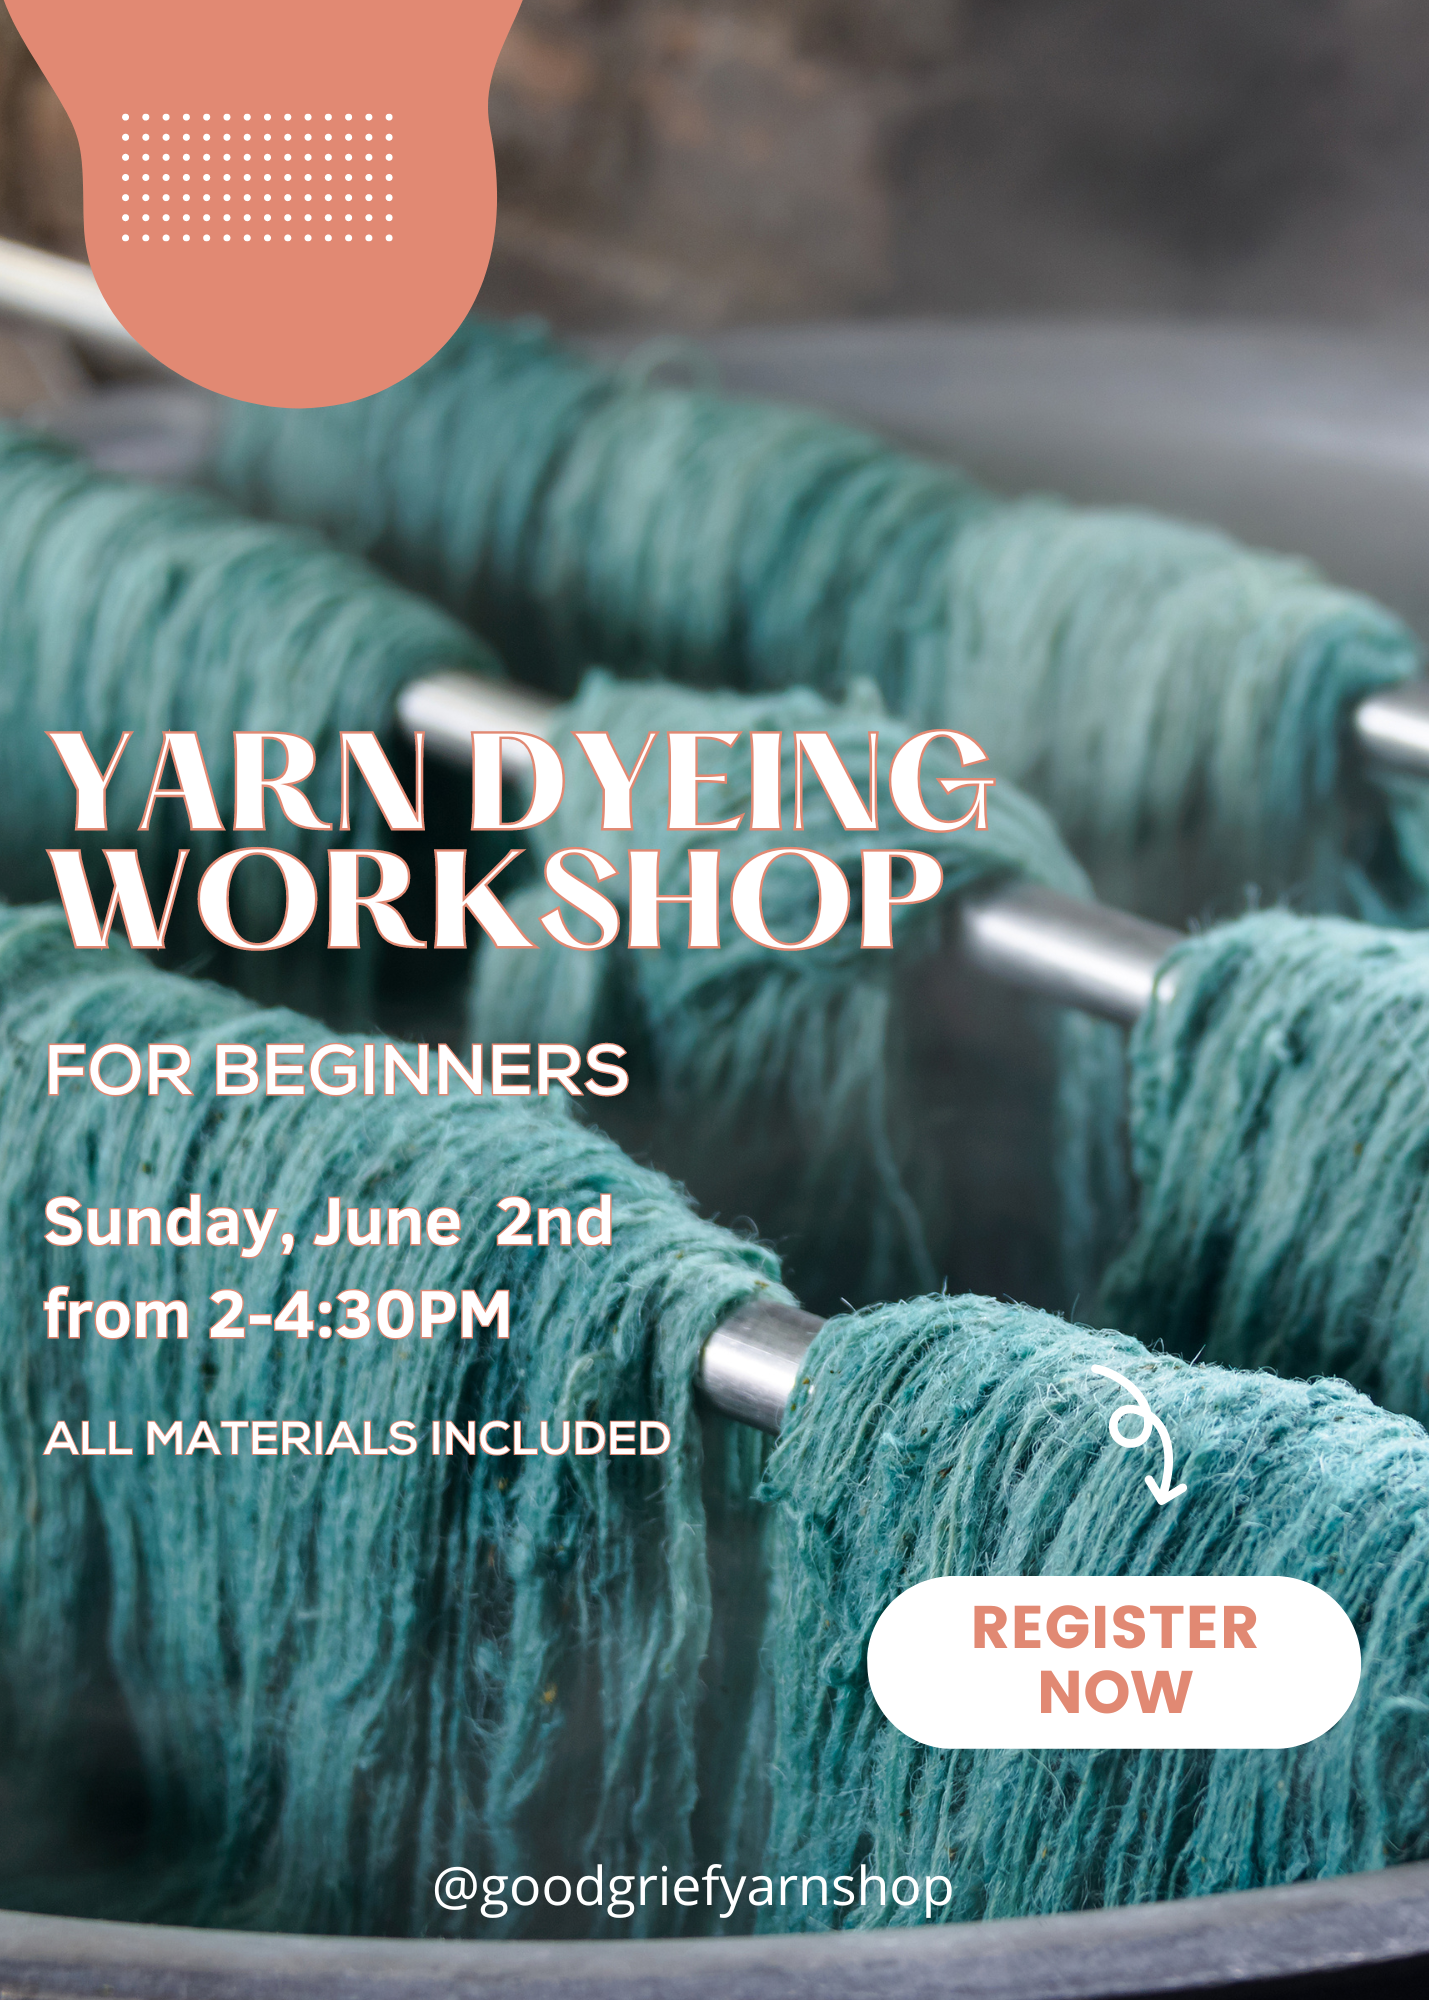 Yarn Dyeing Workshop - Sunday, June 2nd from 2-4:30PM